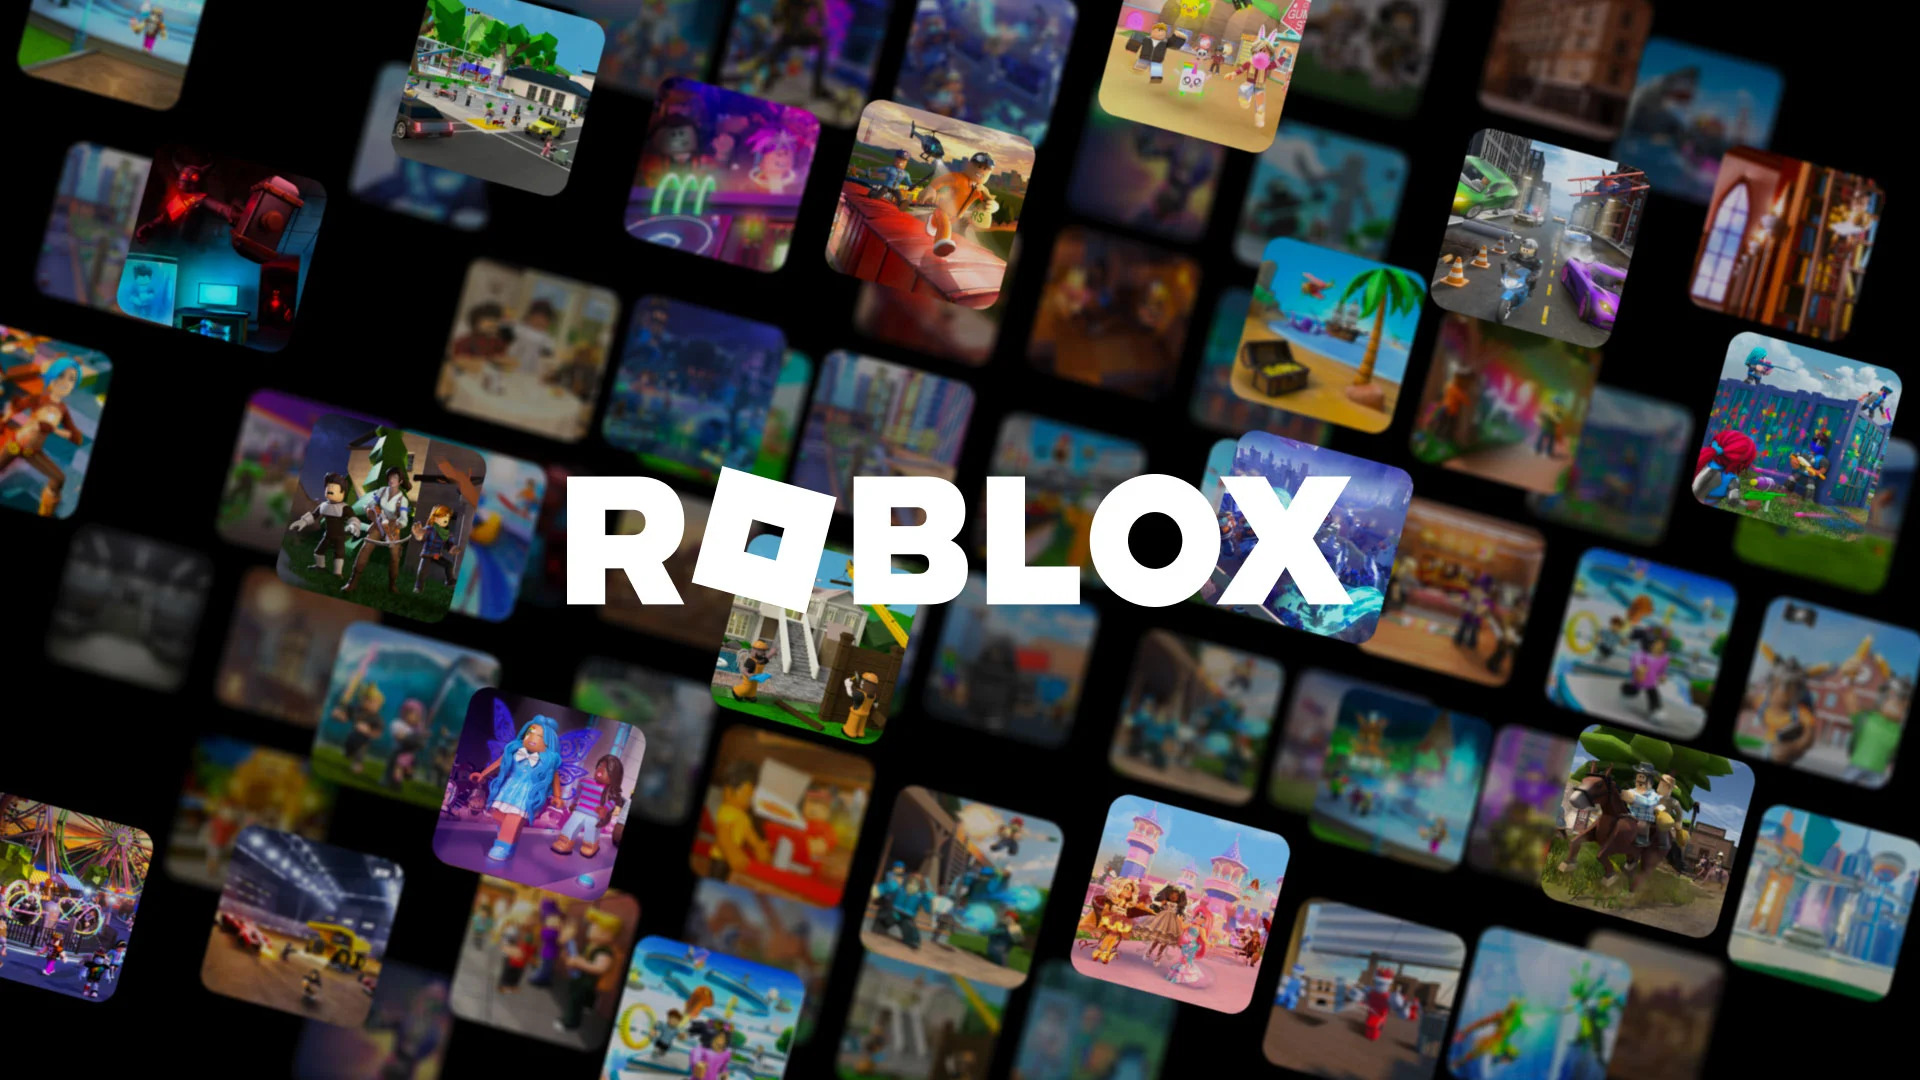 New Feature: Roblox Launches Avatar-Based Voice Calls With Facial Motion Tracking